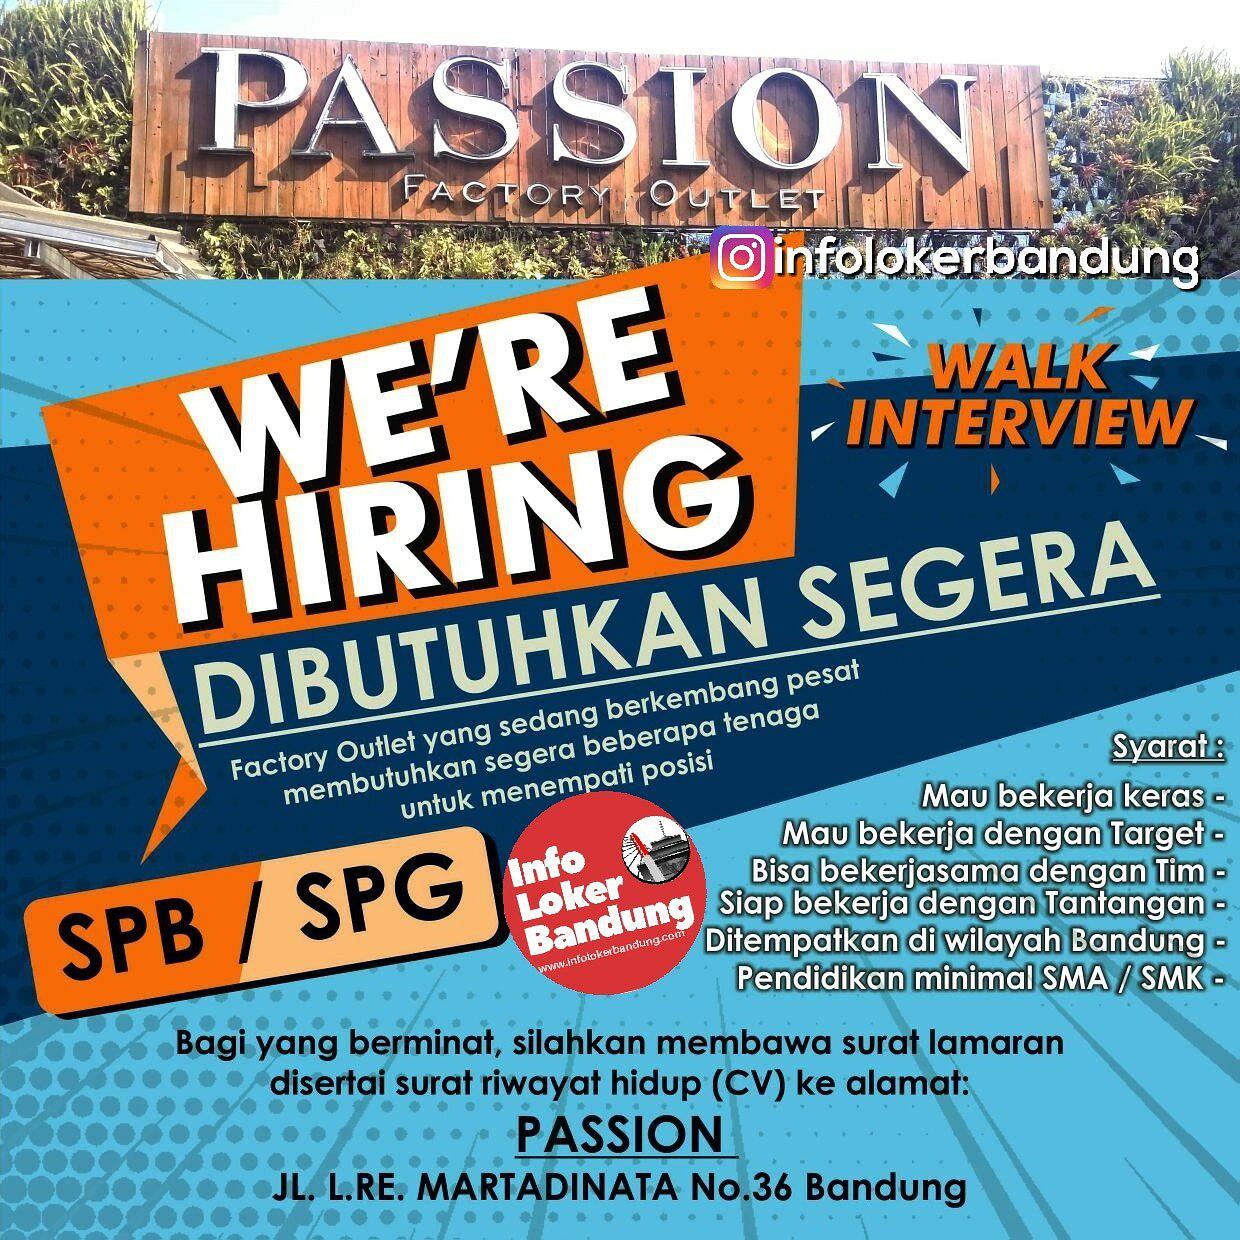 Walk In Interview Passion Factory Outlet Bandung Februari 2019